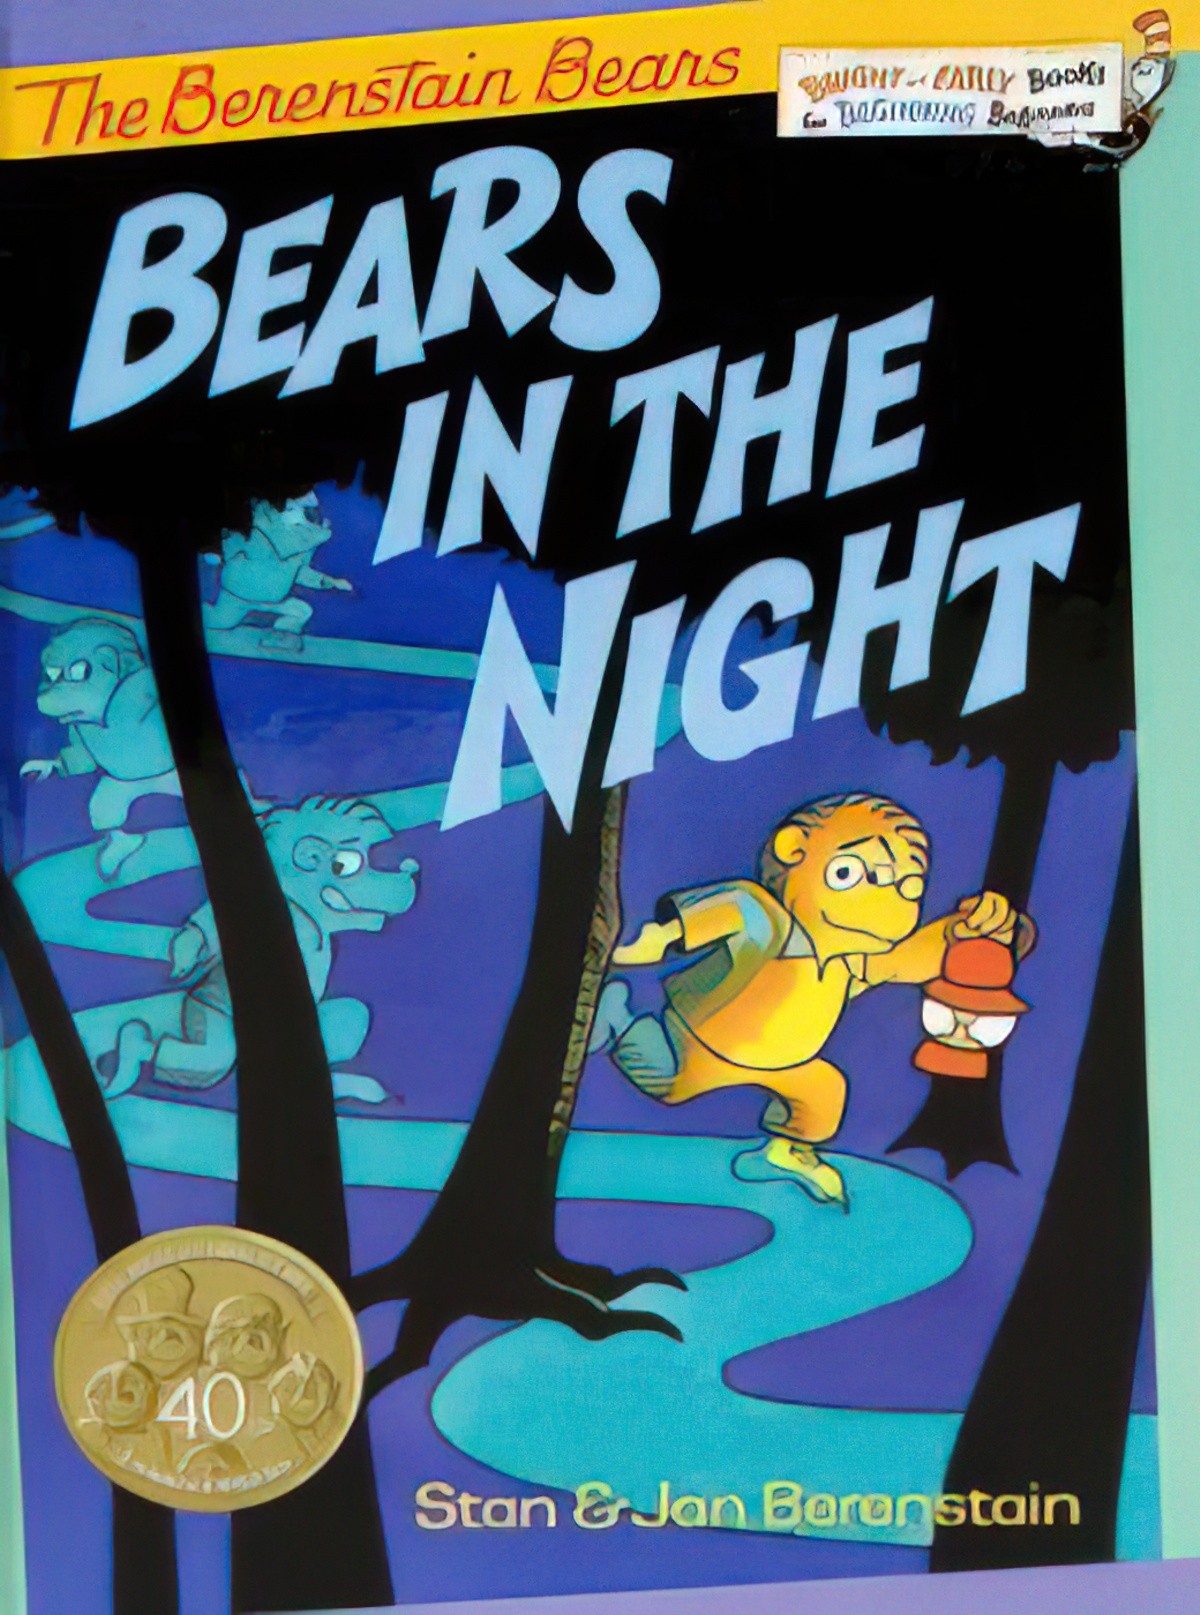 Bears In The Night by Stan and Jan Berenstain Analysis